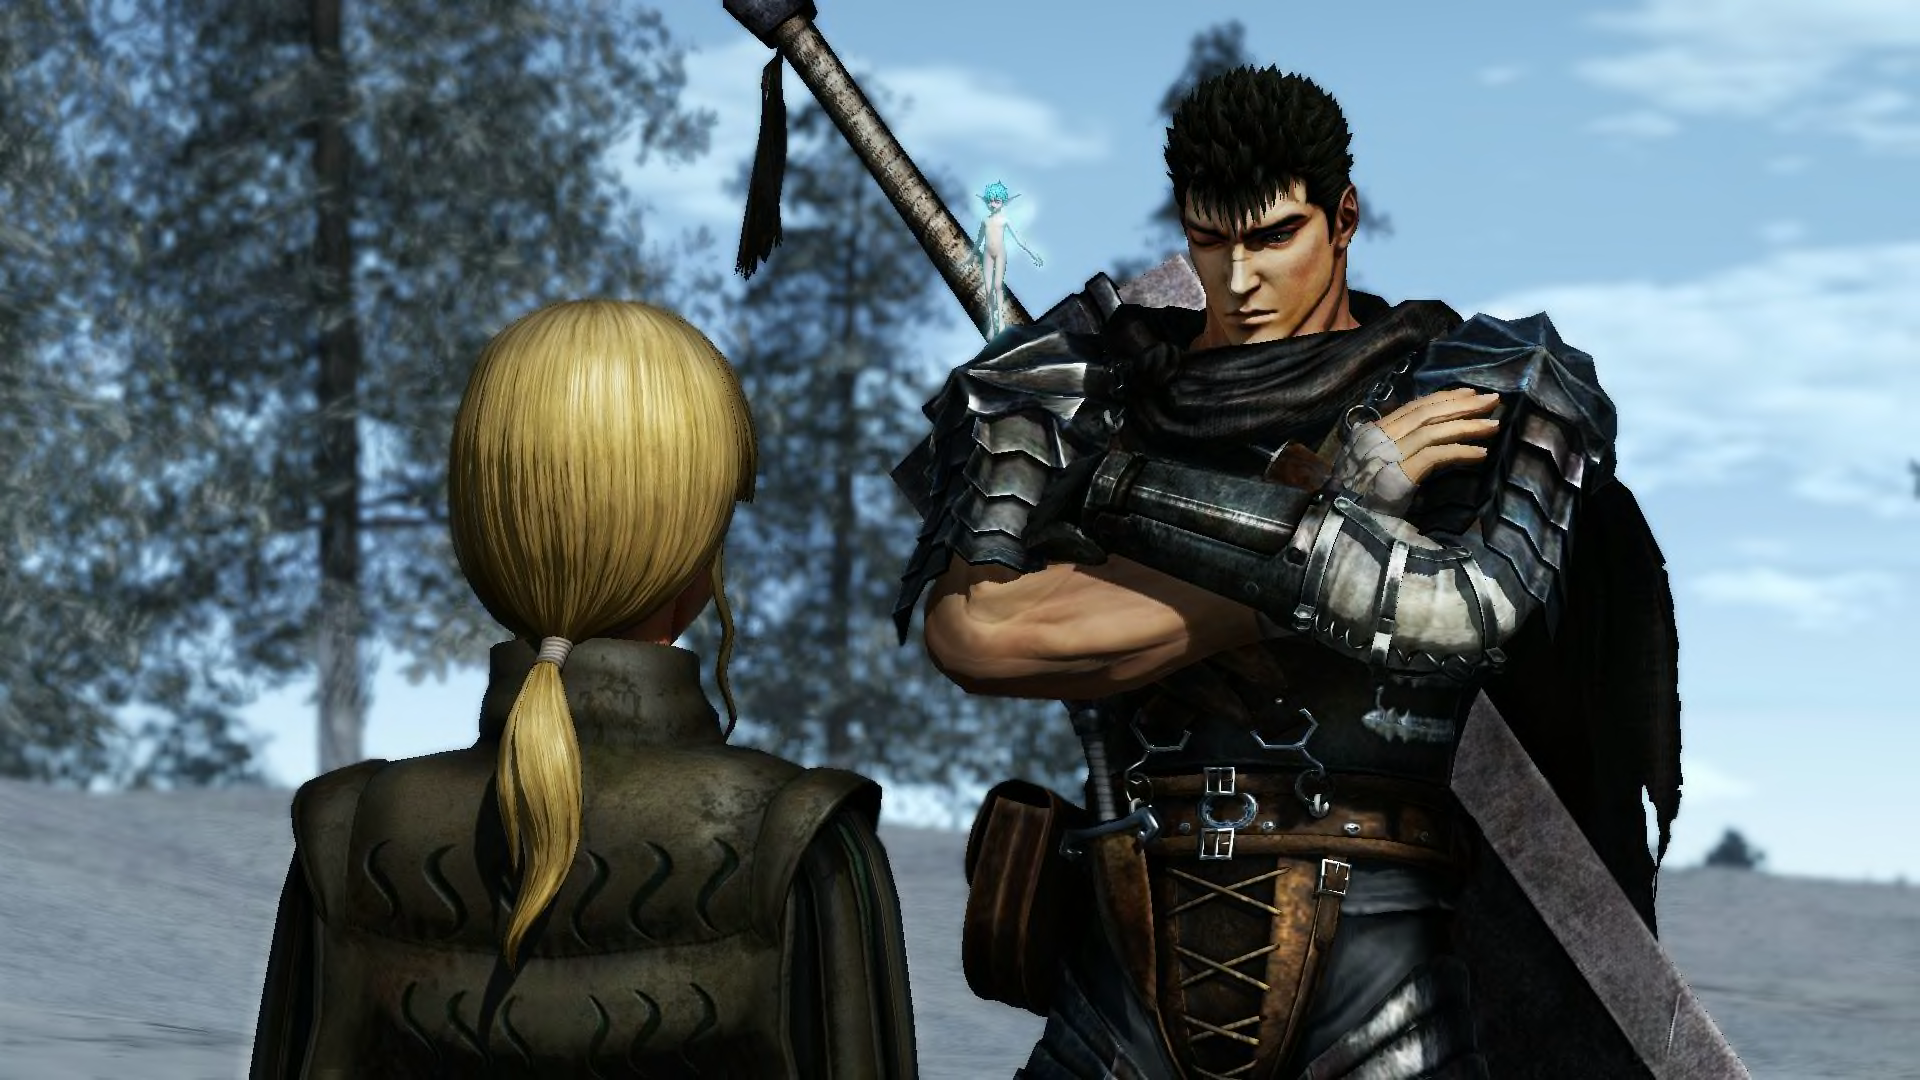 berserk-and-the-band-of-the-hawk-review-hundred-thousand-man-slayer